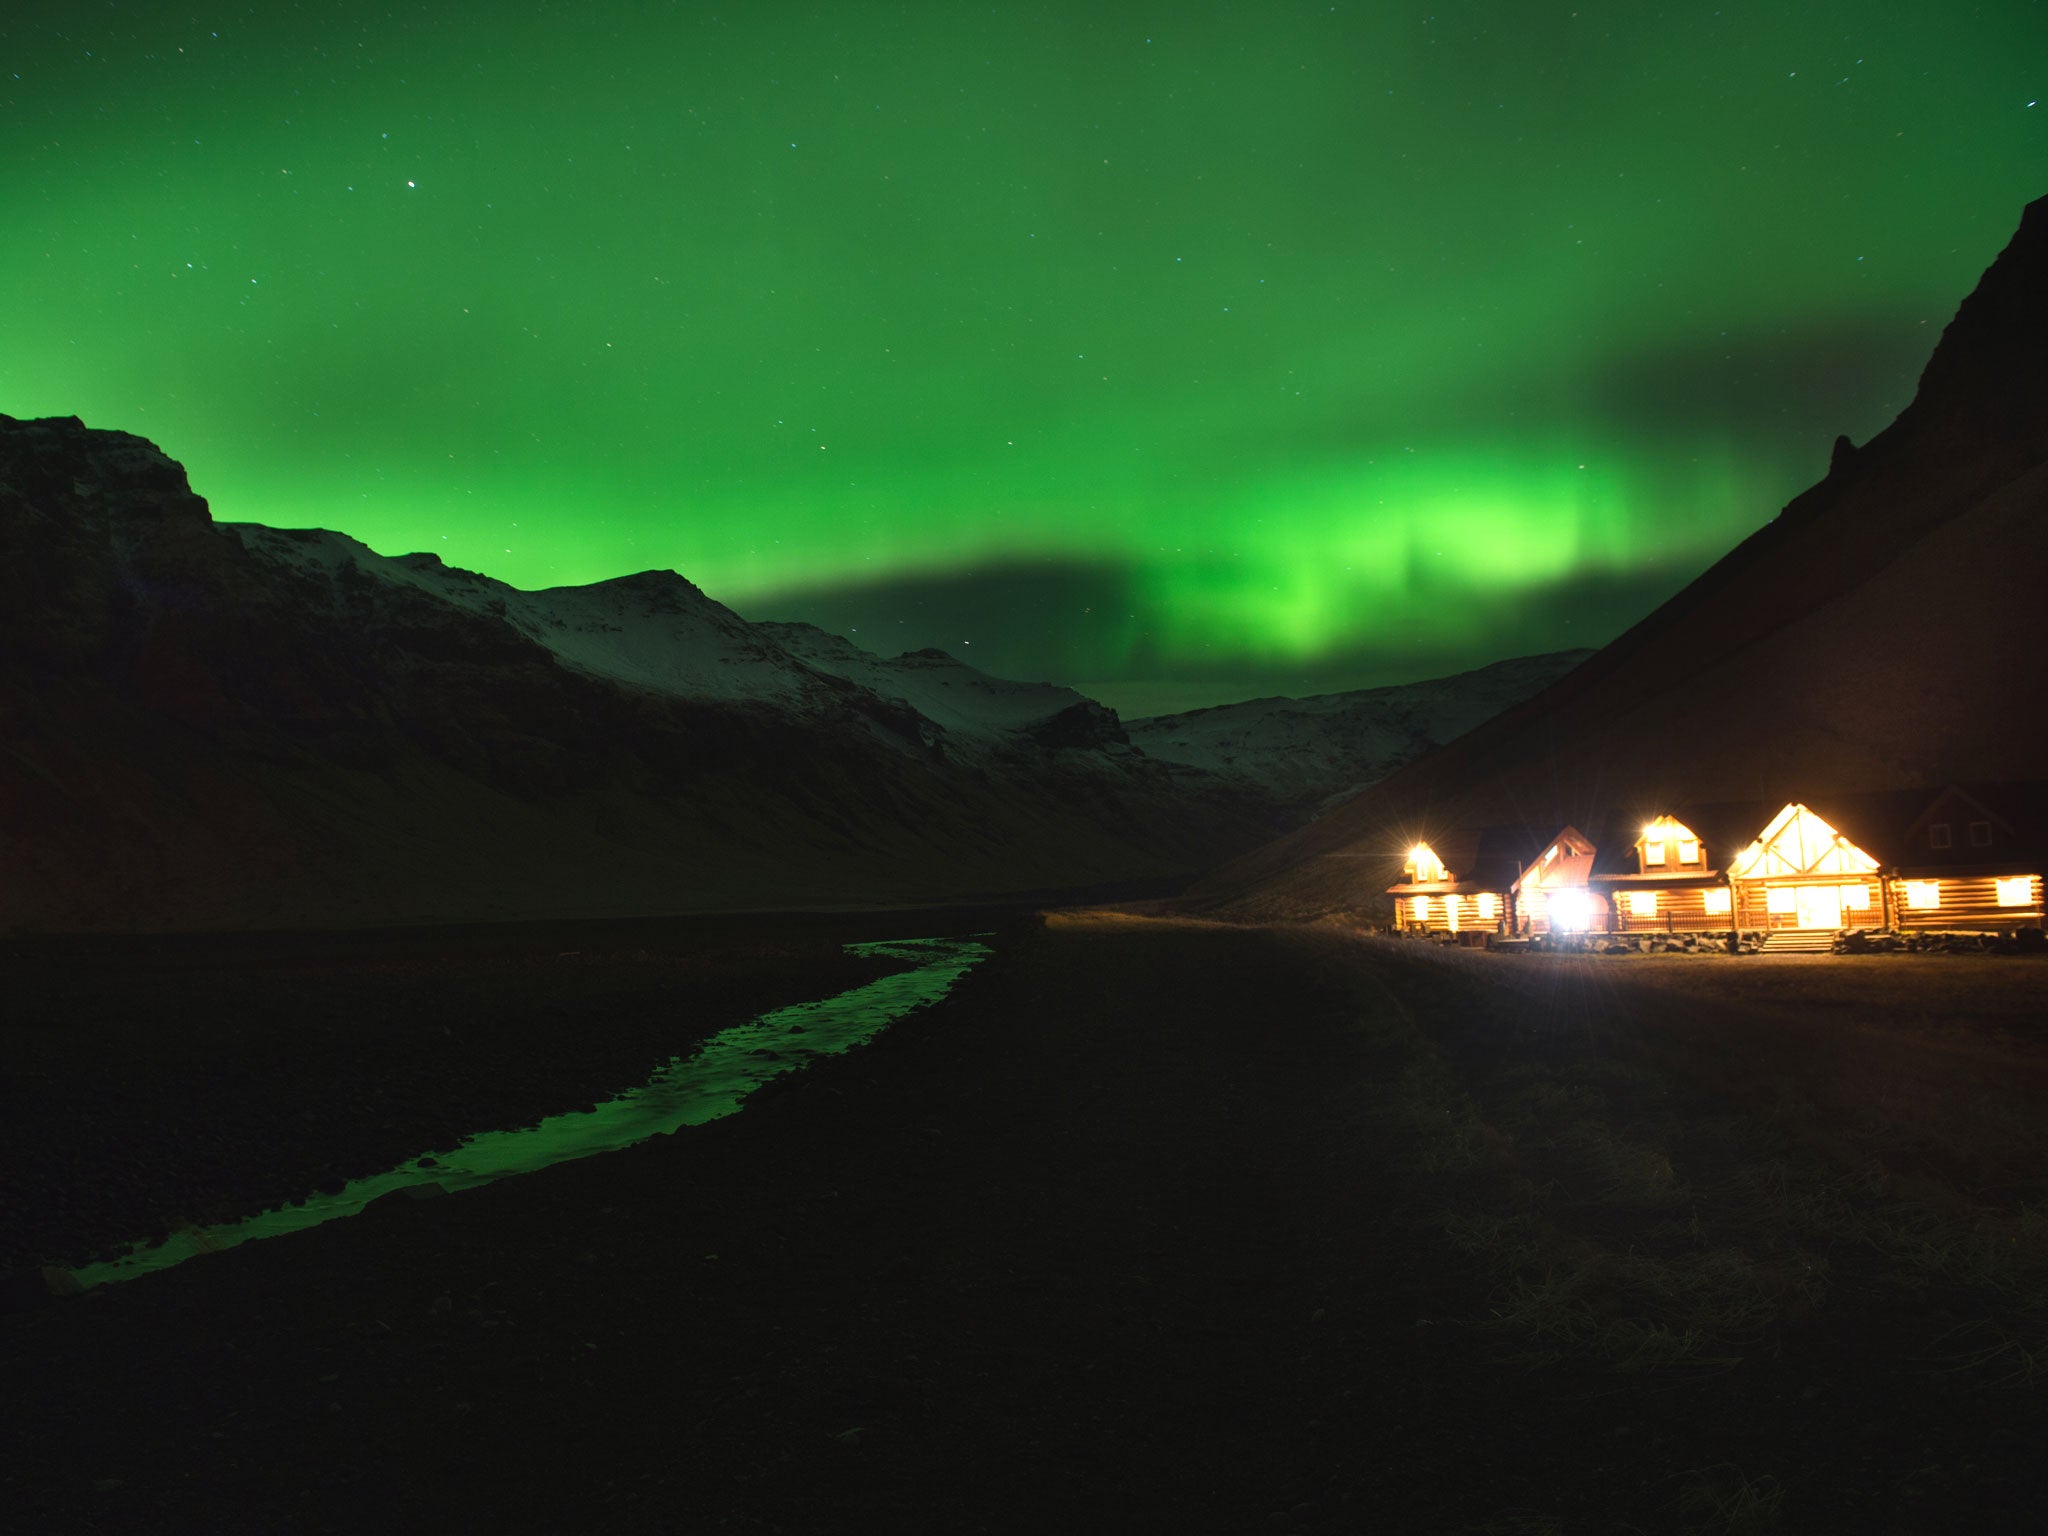 Picture taken on November 8, 2013 showing the northern lights or aurora borealis near the village of Vik, in southern Iceland.